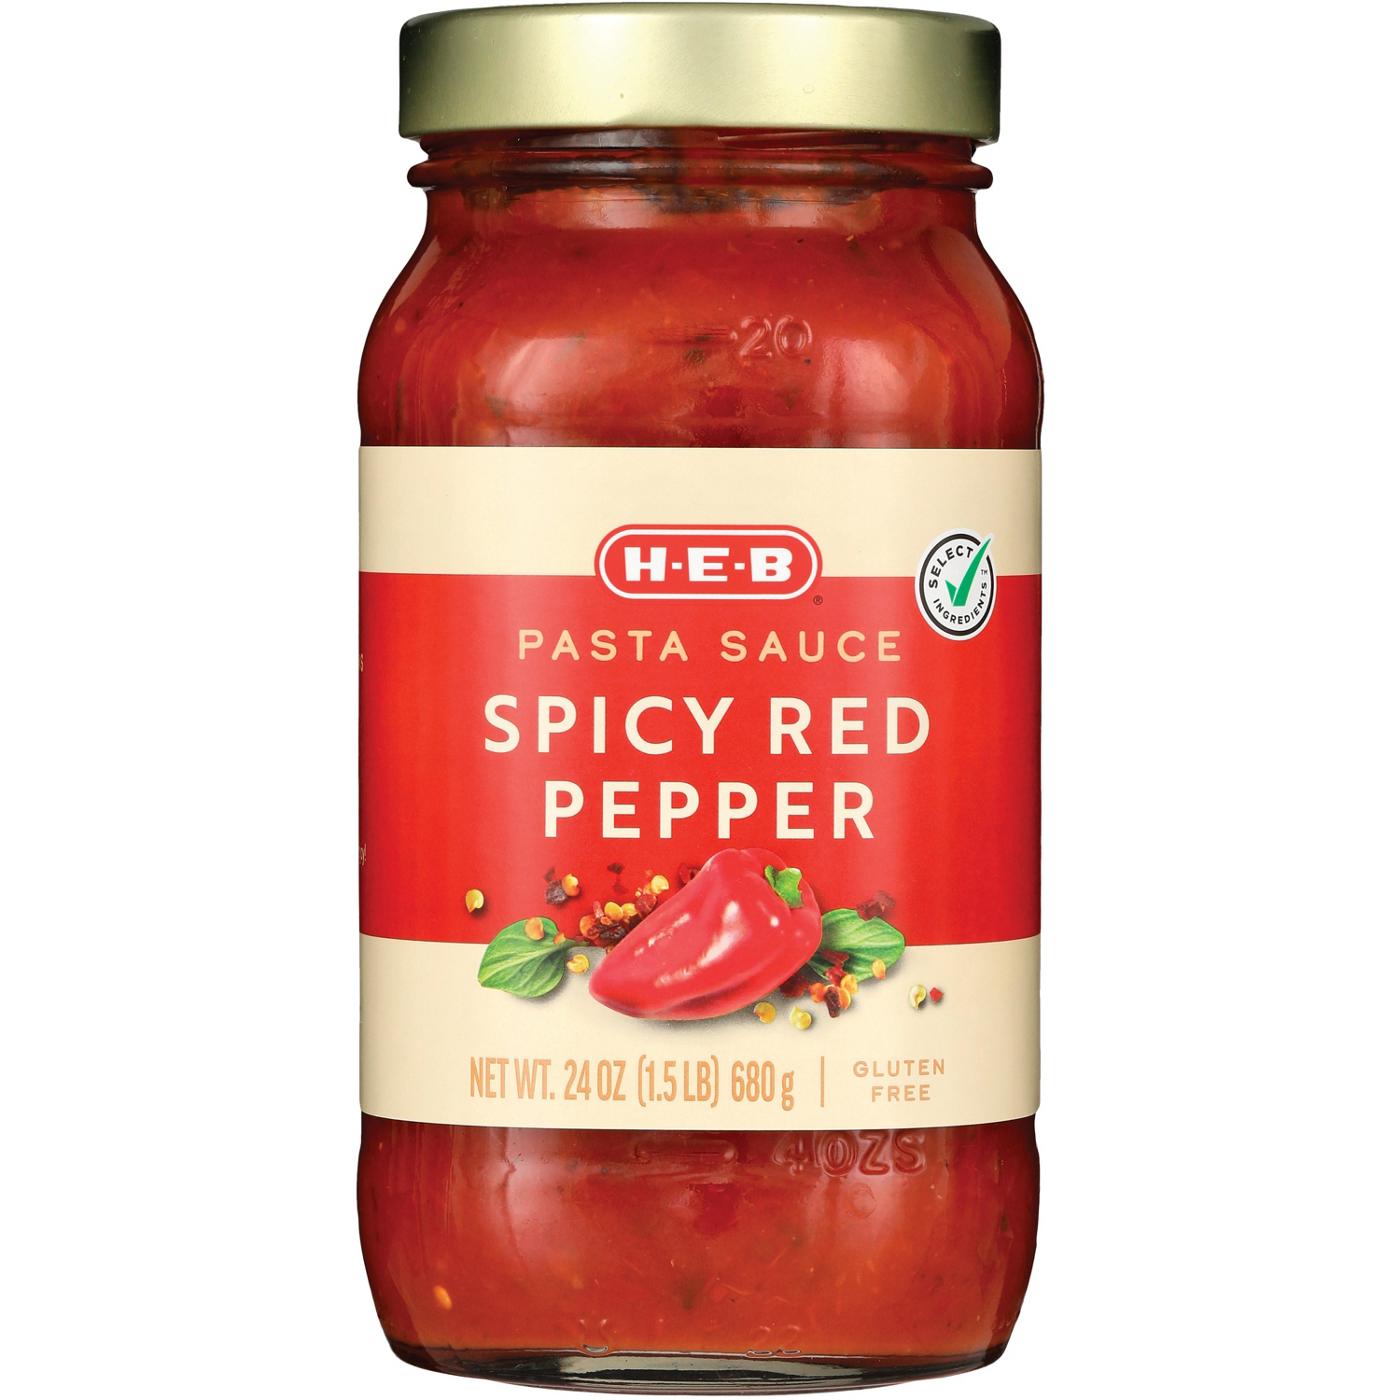 H-E-B Spicy Red Pepper Pasta Sauce; image 1 of 2